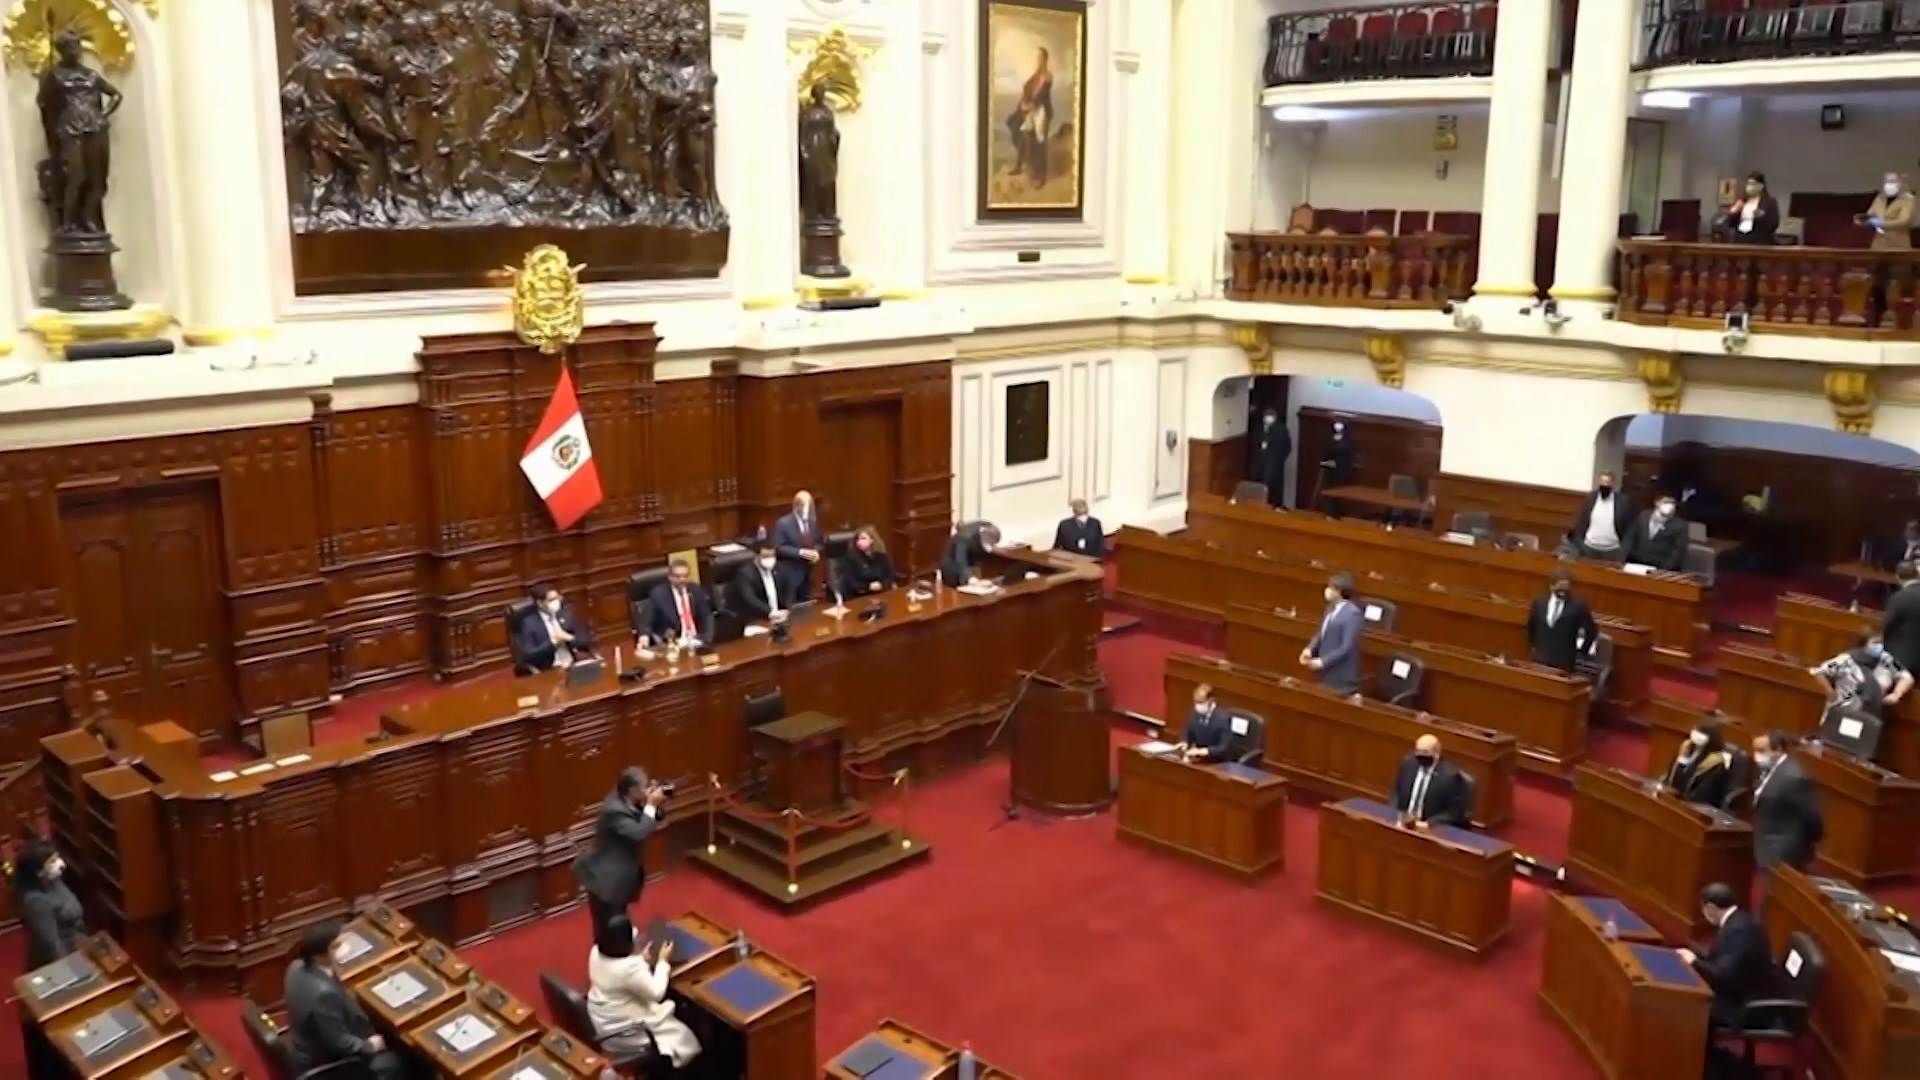 Peru’s Congress approved on Wednesday, November 2nd, the partial withdrawal of funds from its state-run pension system as a lifeline for Peruvians still reeling from the economic impact of the coronavirus.